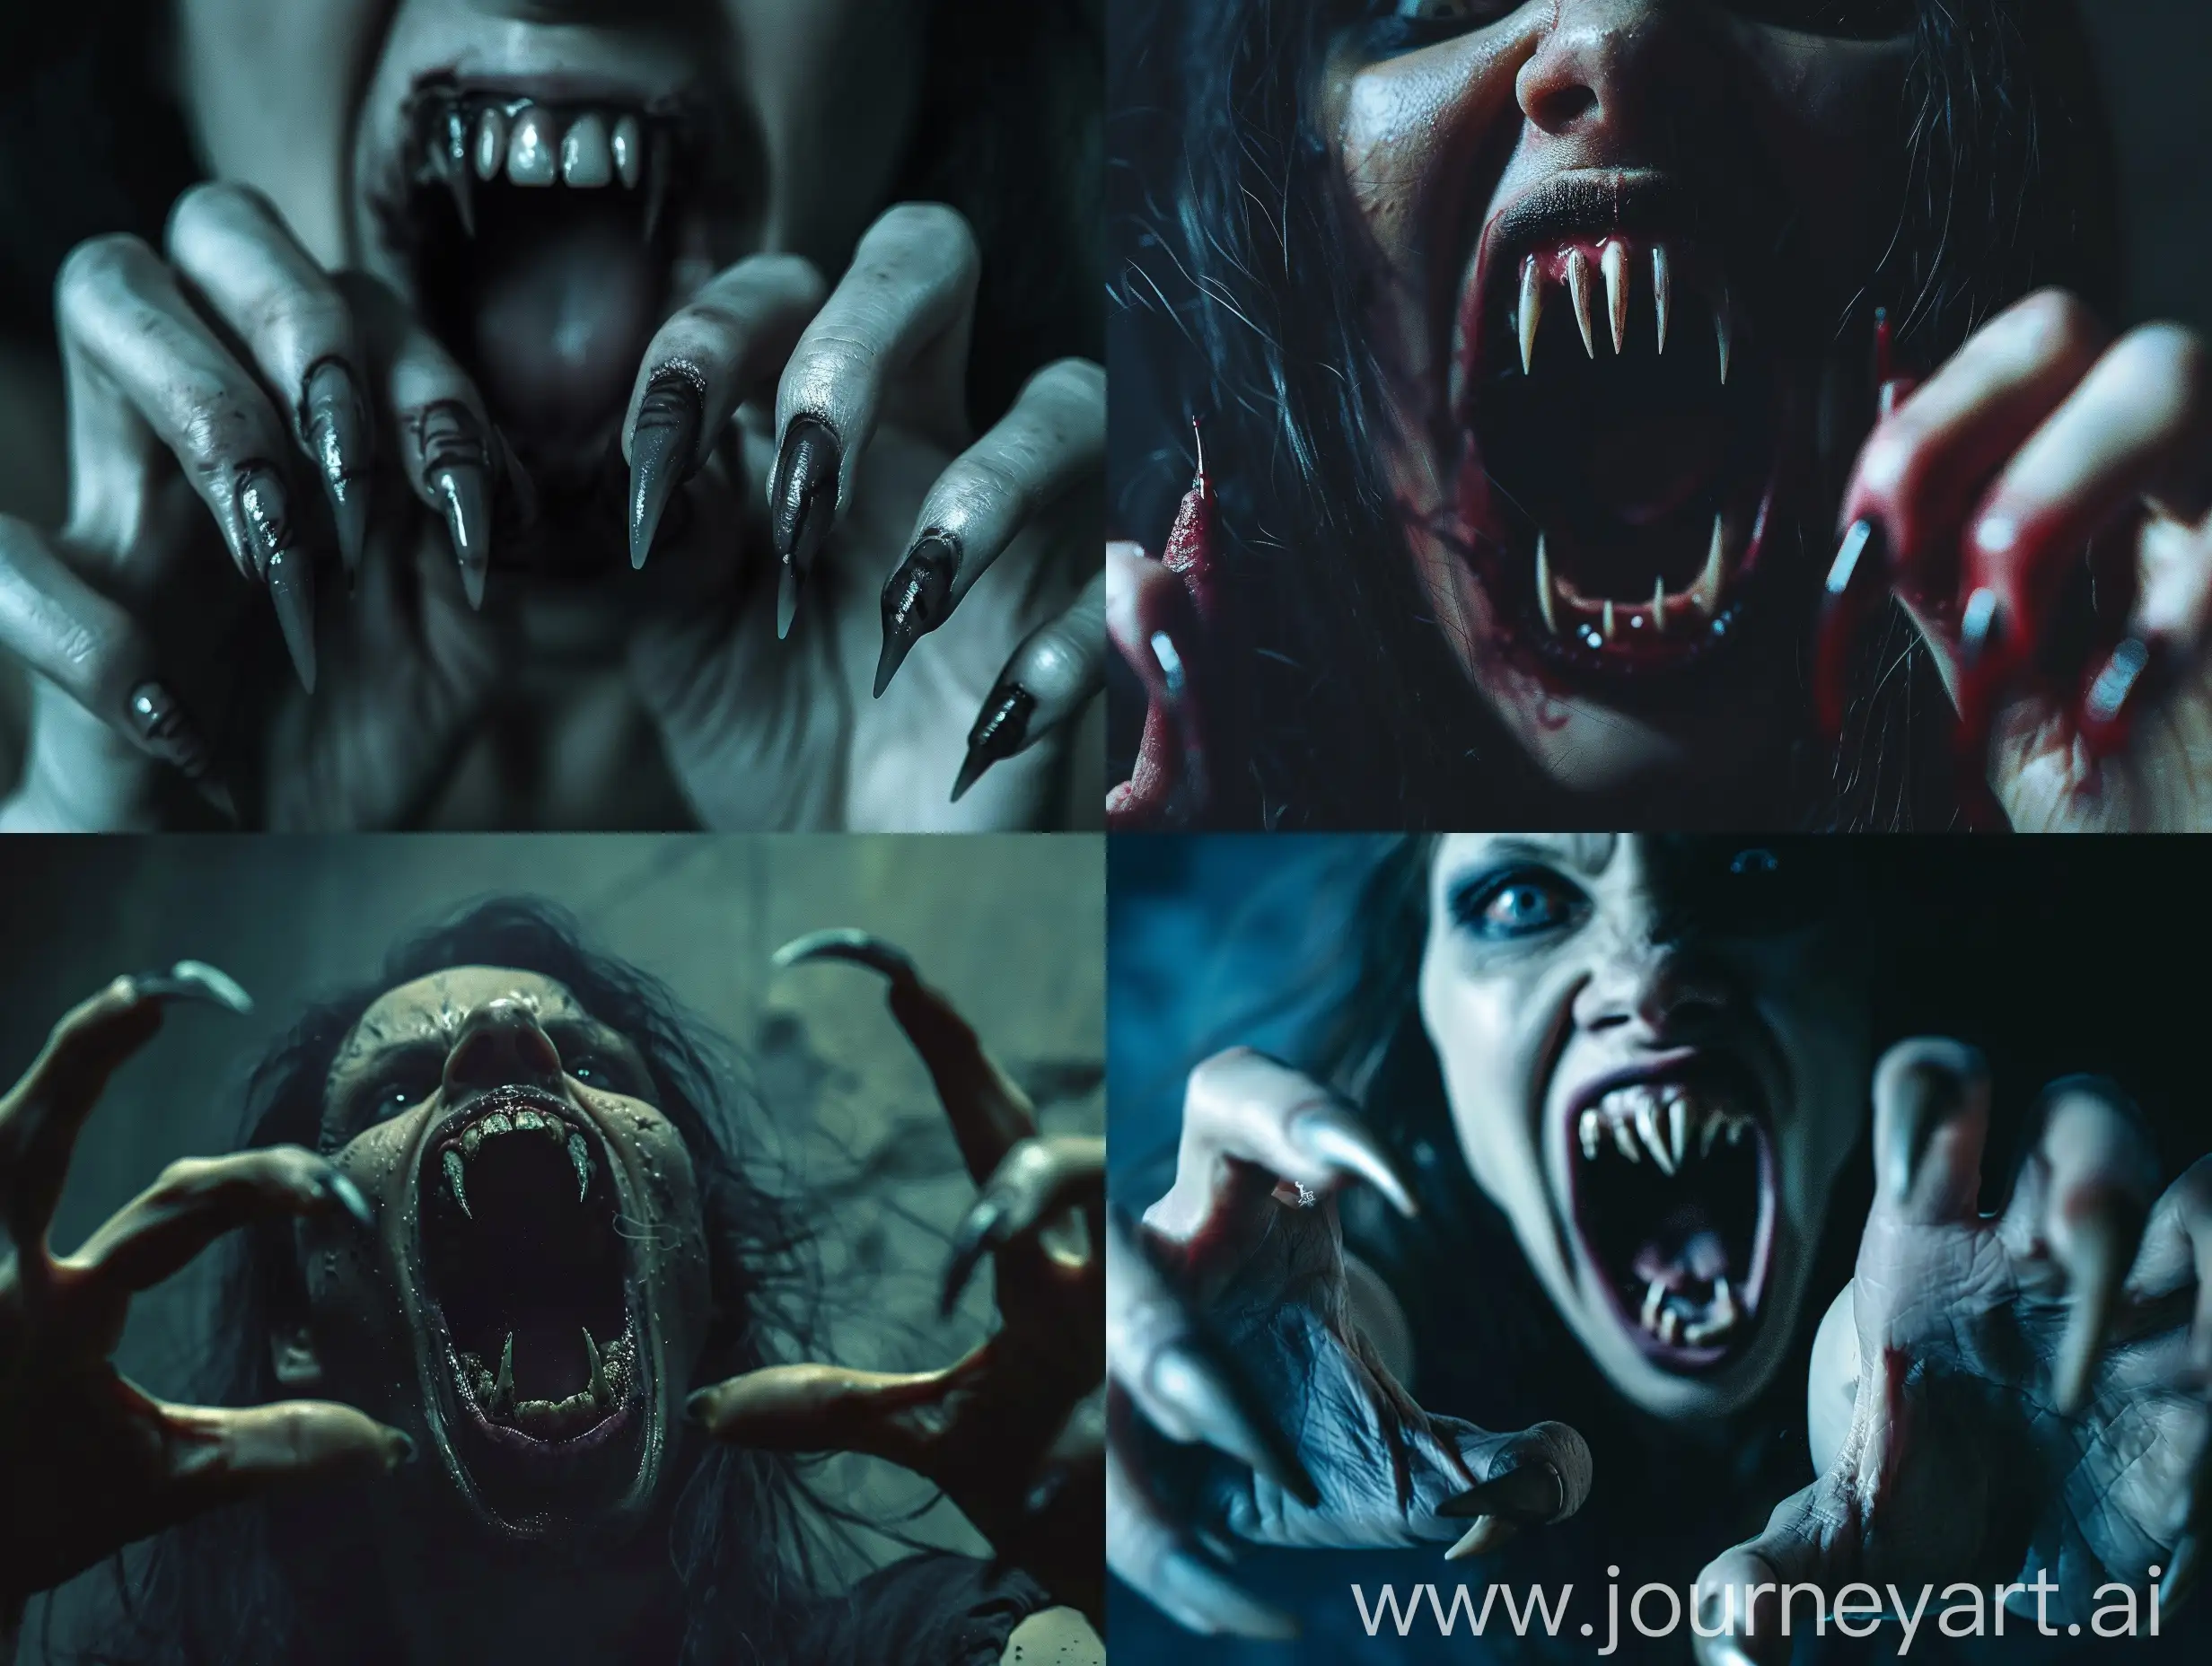 A photorealistic scene of a wild, monstrous vampire woman emerging from the darkness, her menacing mouth open to reveal terrifying fangs. Her extra-long pointed fingernails resemble the claws of a predator, adding to the horror of her appearance. The scene is set in a hauntingly dark room, with atmospheric lighting intensifying the eerie and creepy atmosphere. Every detail, from the texture of her nails to the anatomical precision of her hands, is meticulously depicted in high detail. The hyper-realism and cinematic quality of the image bring out the full terror of this undead creature, making it a nightmare-inducing and grotesque depiction. The vampire's aggressive and threatening presence is captured with intense realism, ensuring that every aspect of this photorealistic horror scene is as terrifying as it